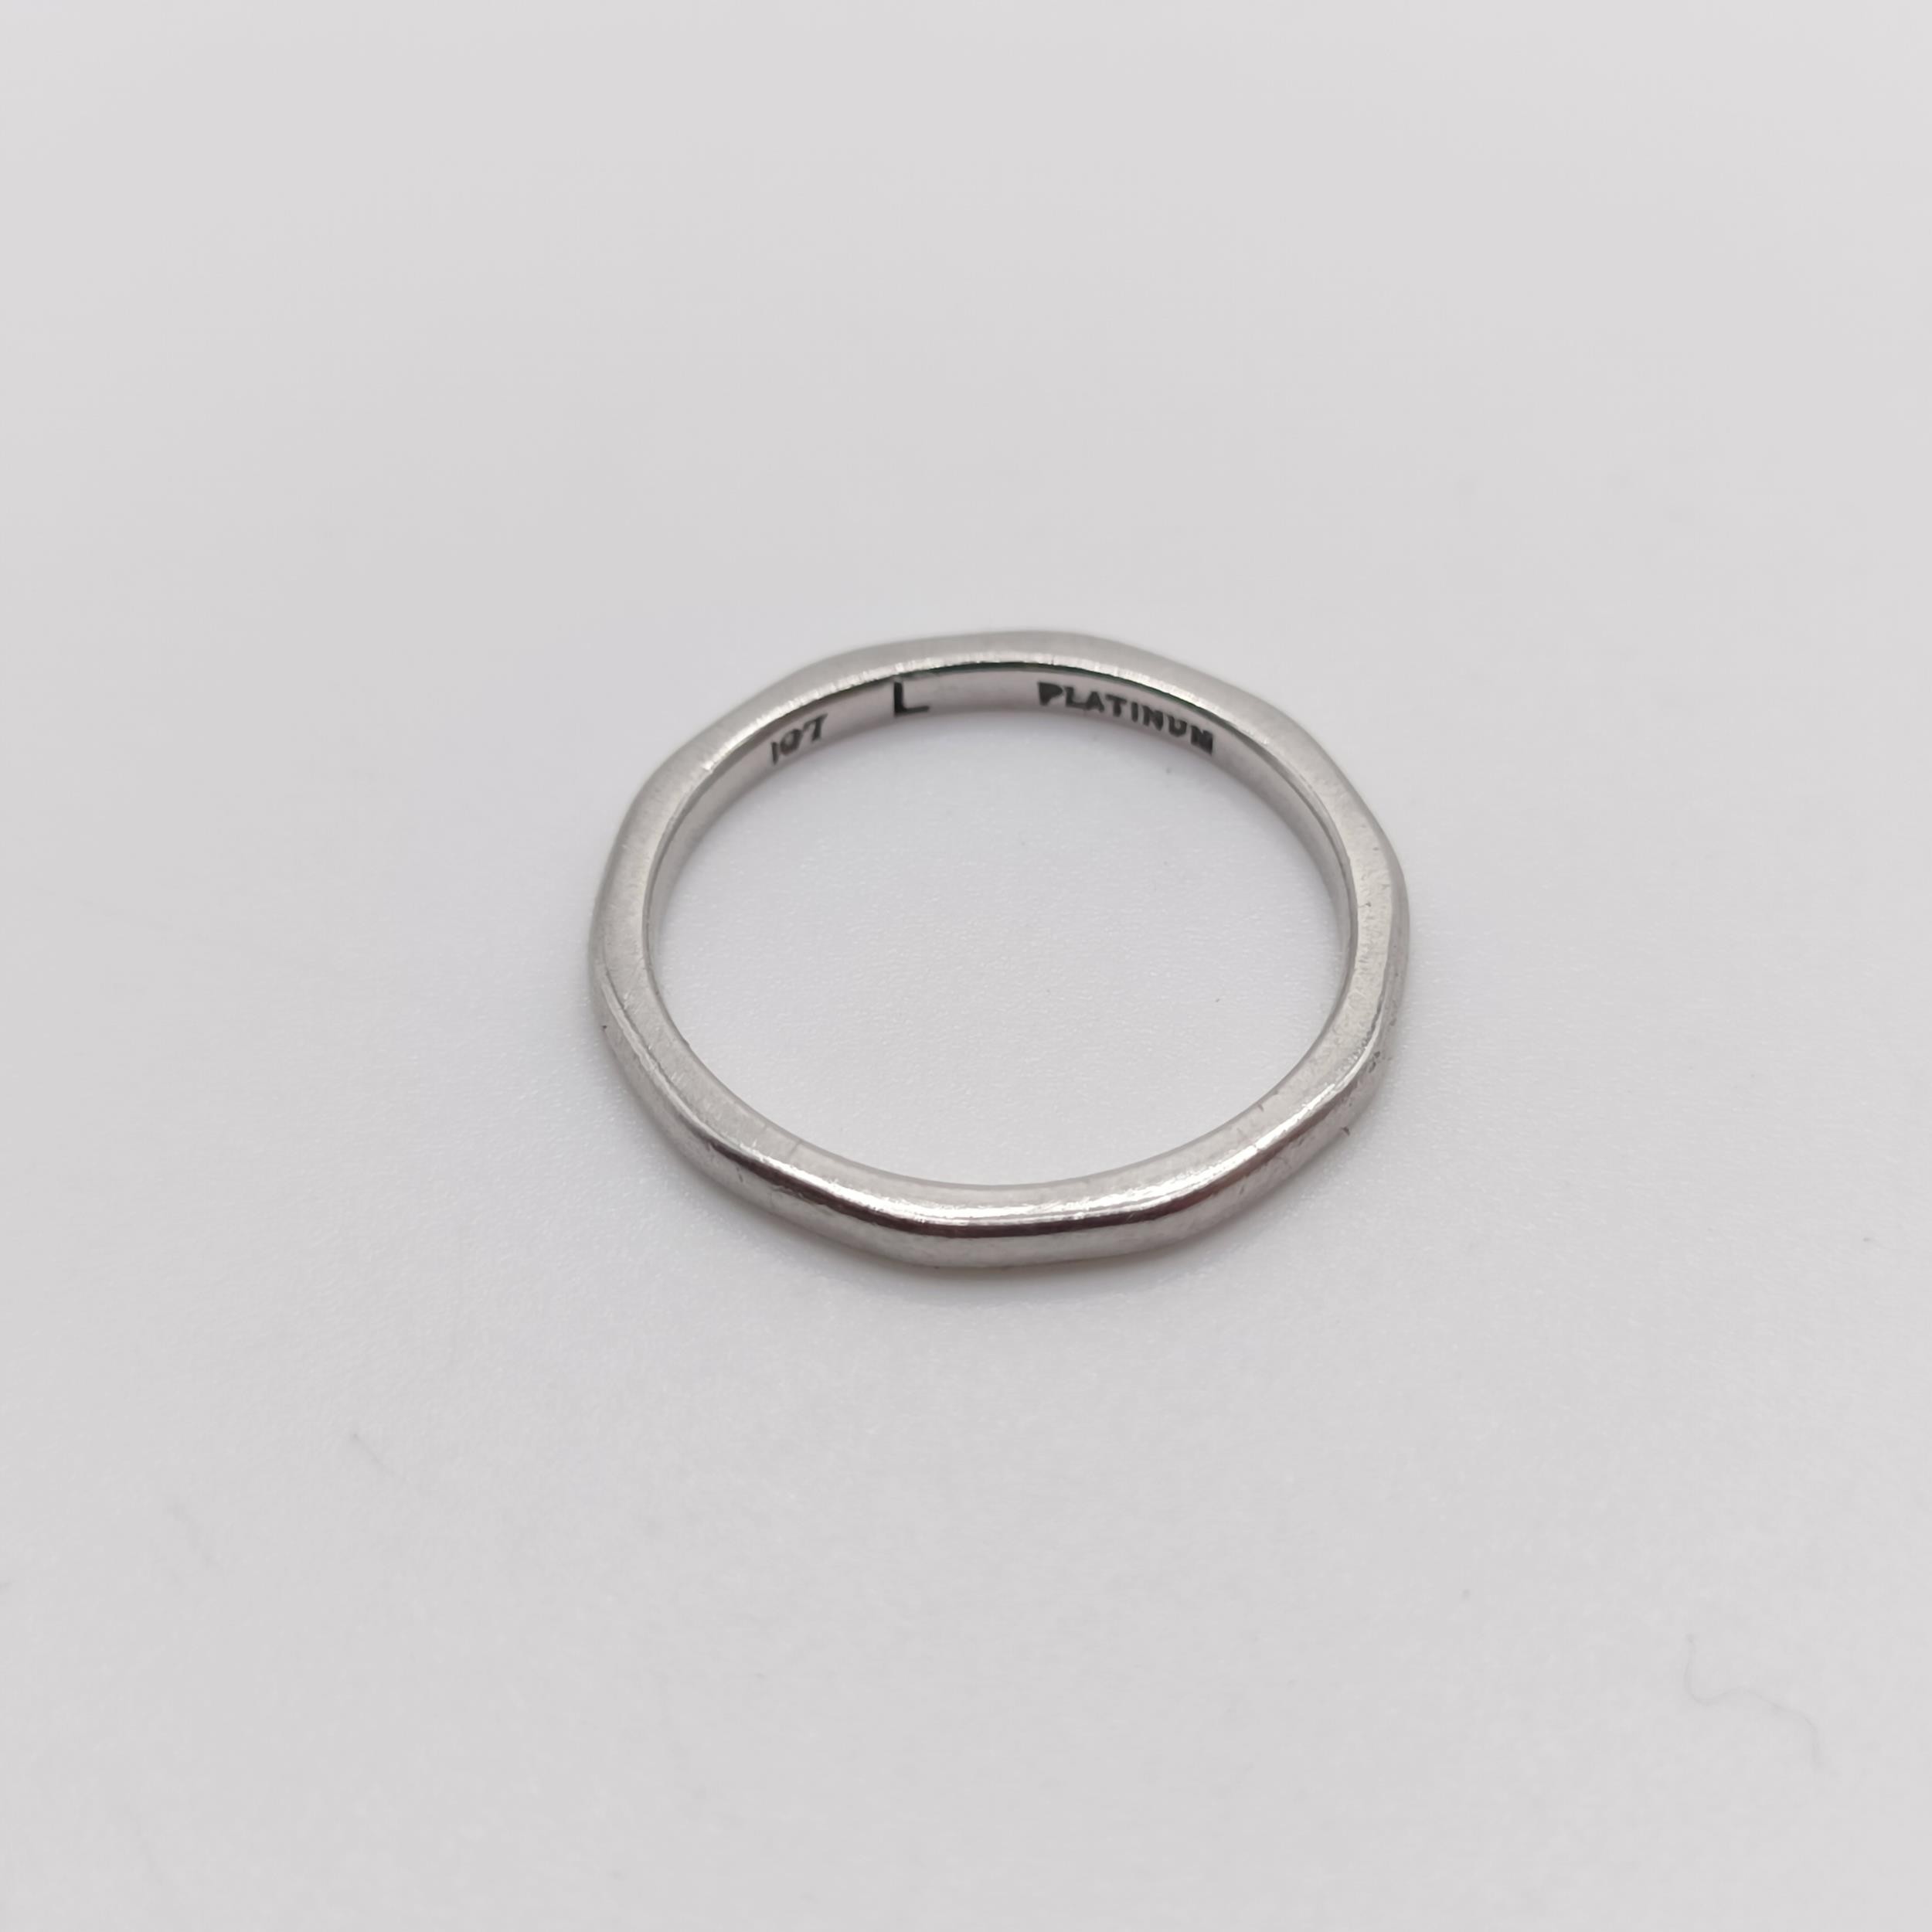 A platinum wedding band, ring size K, and a 18ct gold wedding band, with a garnet mount added, - Image 7 of 7